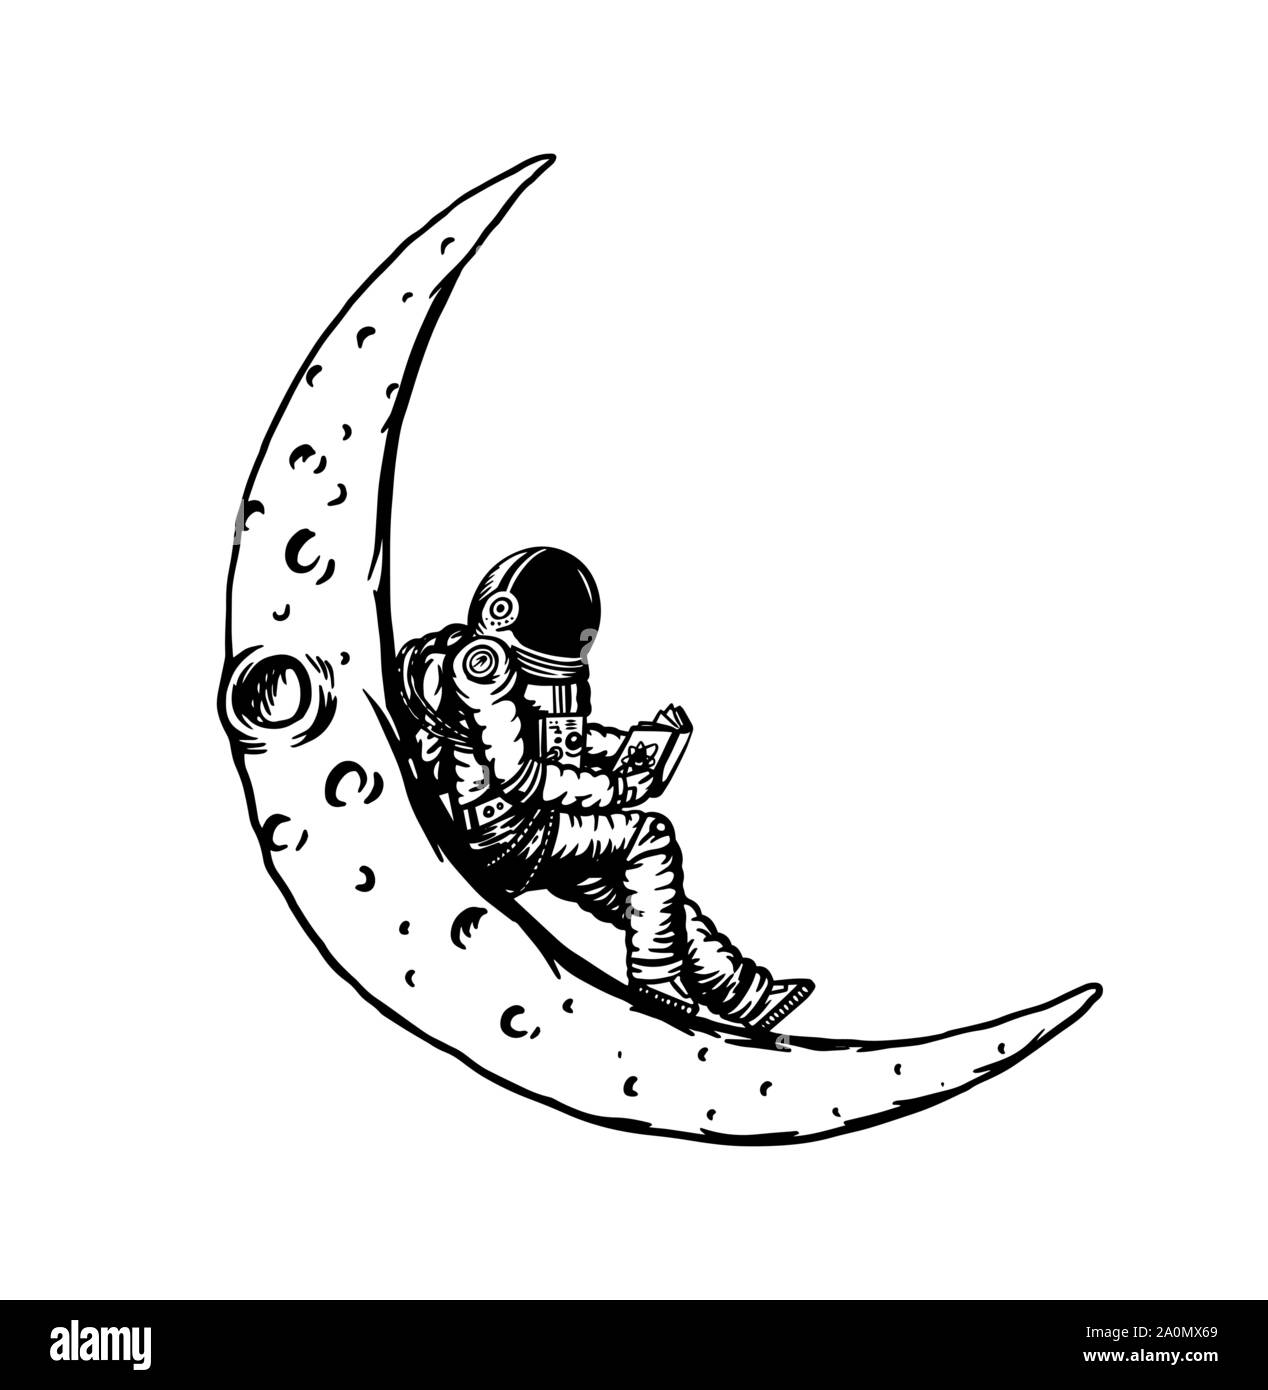 Soaring Spaceman in space. The astronaut on the moon. Man in the solar system. Engraved hand drawn Old sketch in vintage style. Stock Vector